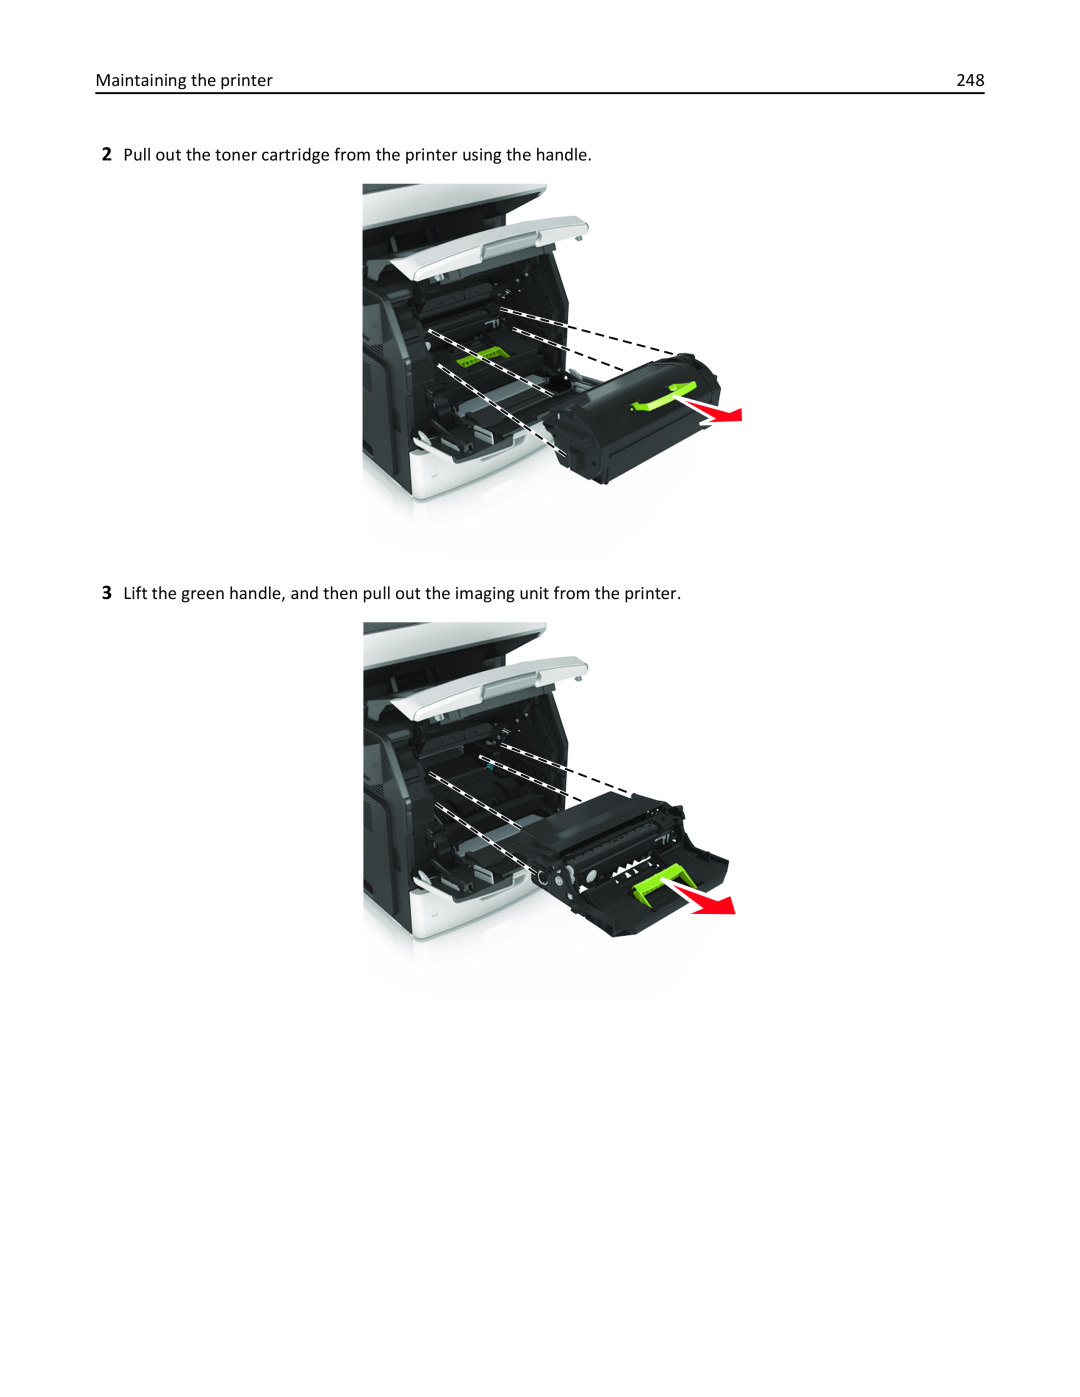 Lexmark 237, MX710DHE, 24T7310, 037 Maintaining the printer, Pull out the toner cartridge from the printer using the handle 